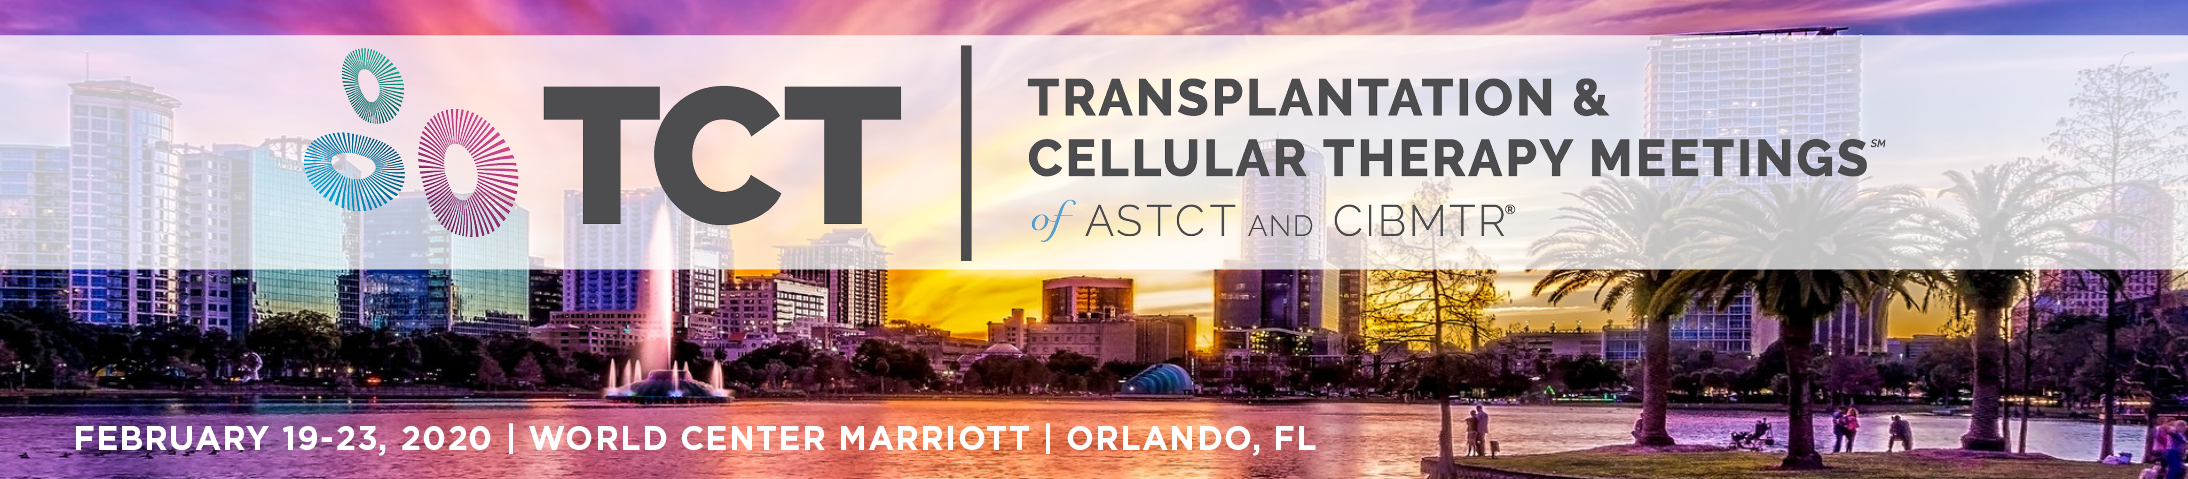 2020 TCT | Transplantation & Cellular Therapy Meetings of ASTCT and CIBMTR